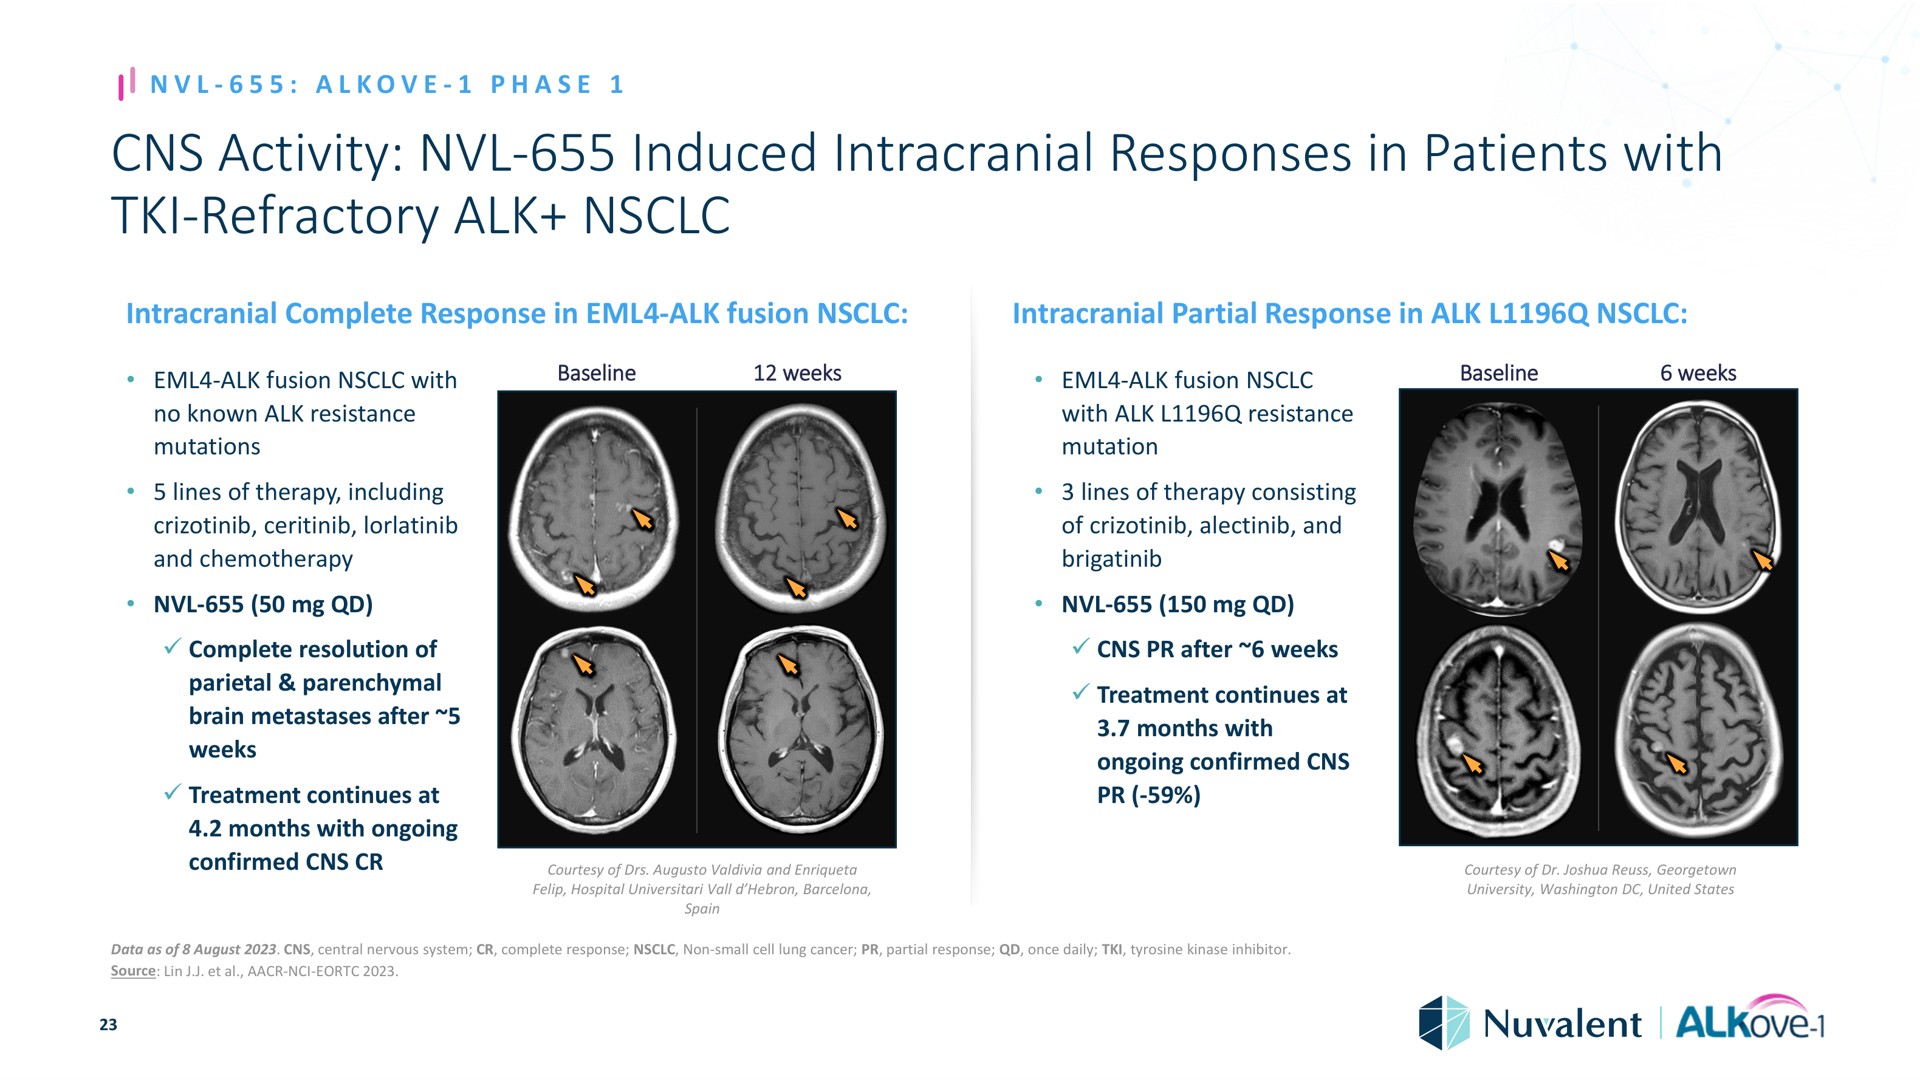 activity induced intracranial responses in patients with refractory alk phase refractory complete response alk fusion partial response alk fusion no known resistance mutations lines of therapy including and chemotherapy complete resolution of parietal parenchymal brain metastases after weeks treatment continues at months ongoing confirmed weeks weeks alk fusion resistance mutation lines of therapy consisting of and after weeks treatment continues at months ongoing confirmed courtesy of and hospital vall barcelona courtesy of university united states data as of august central nervous system complete response non small cell lung cancer partial response once daily tyrosine kinase inhibitor source lin | Nuvalent